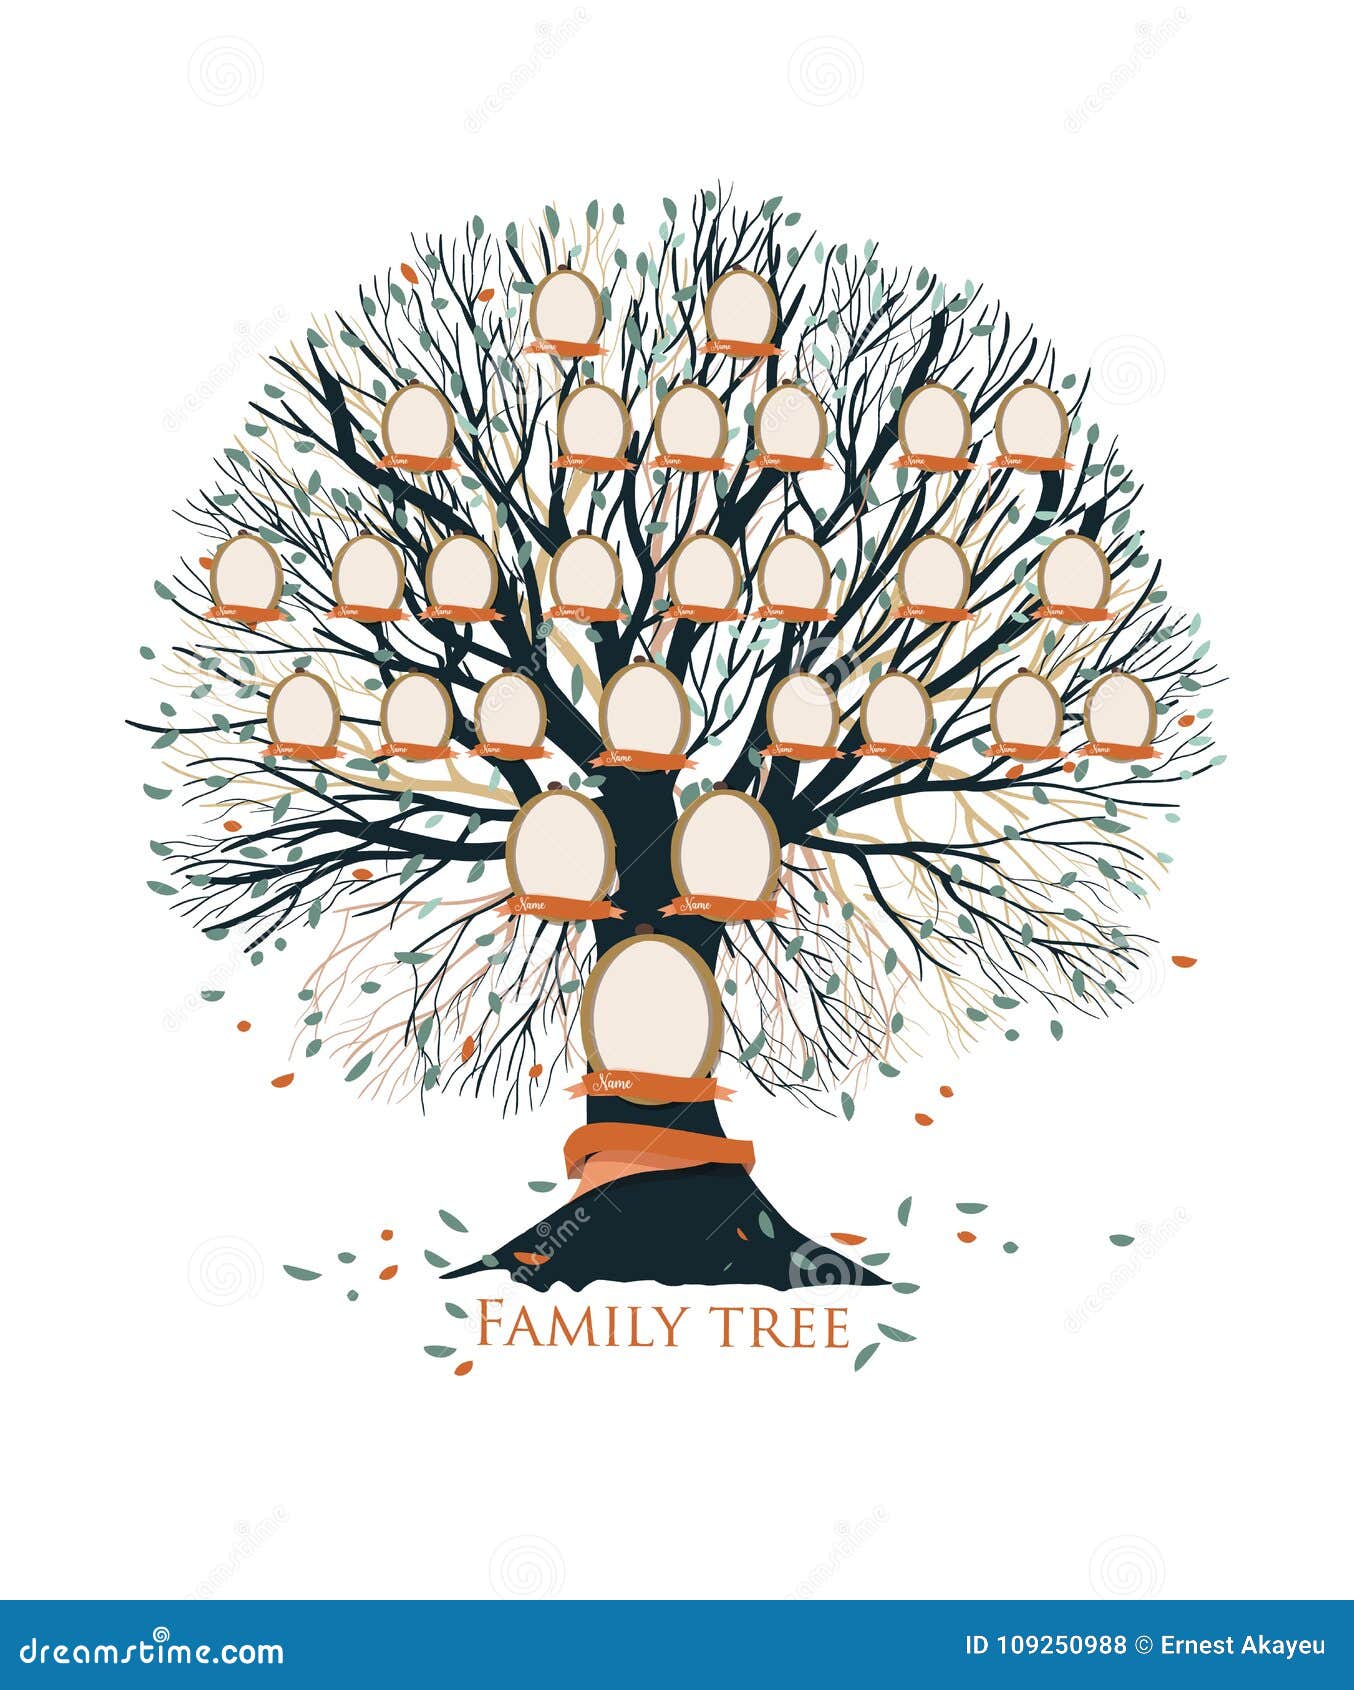 family tree, pedigree or ancestry chart template with branches, leaves, empty photo frames  on white background